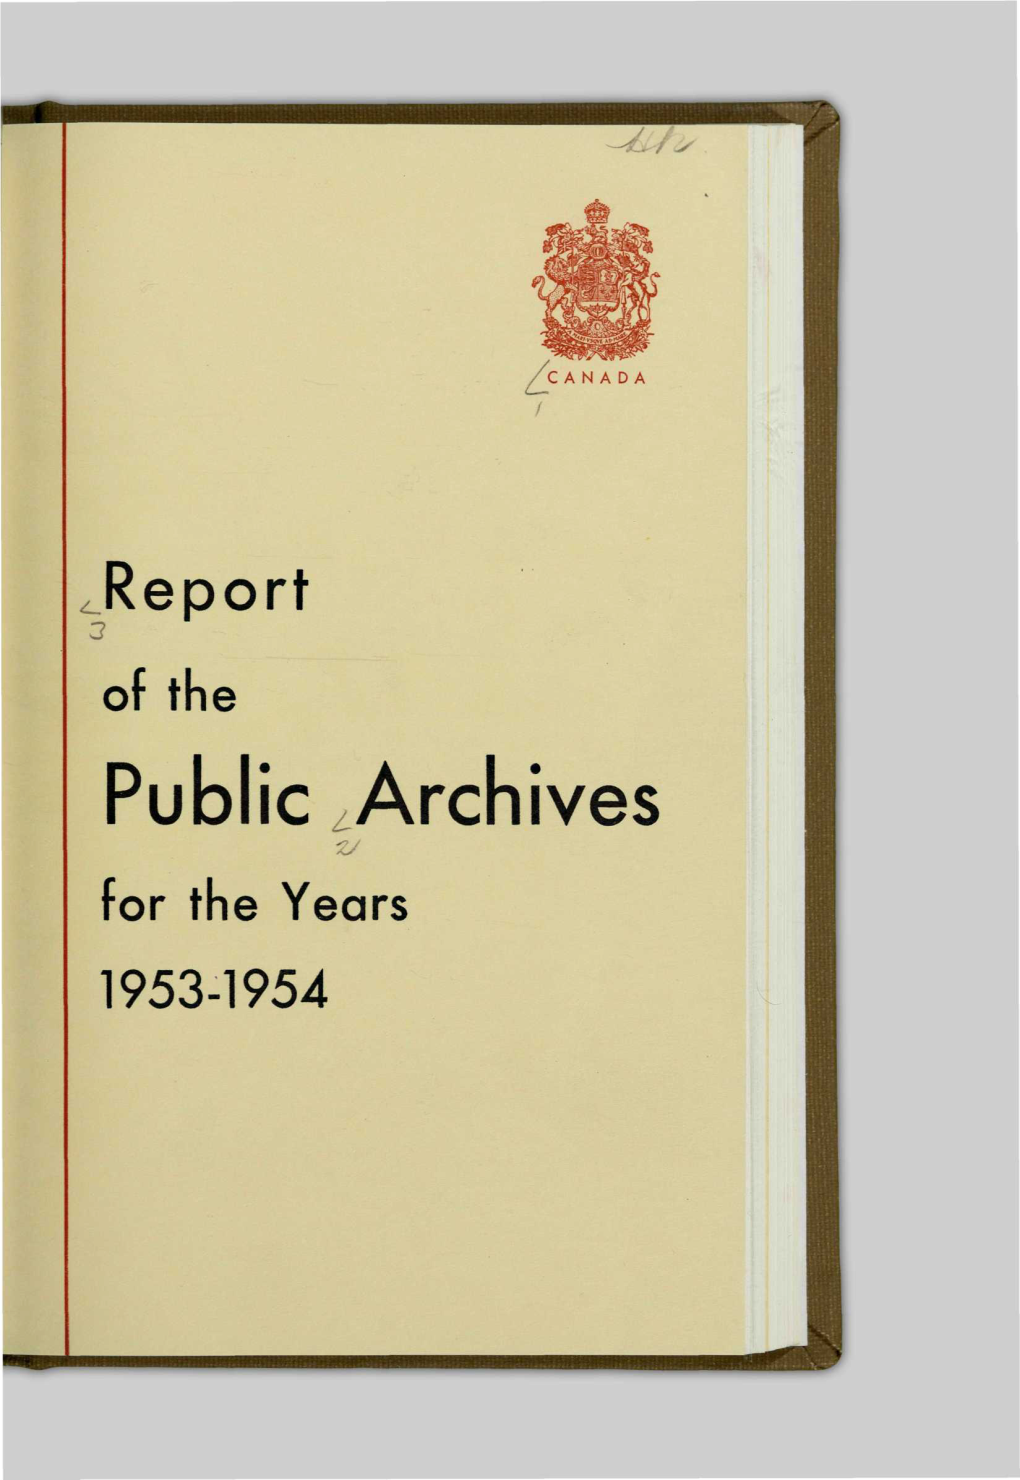 Public ^Archives for the Years 1953-1954